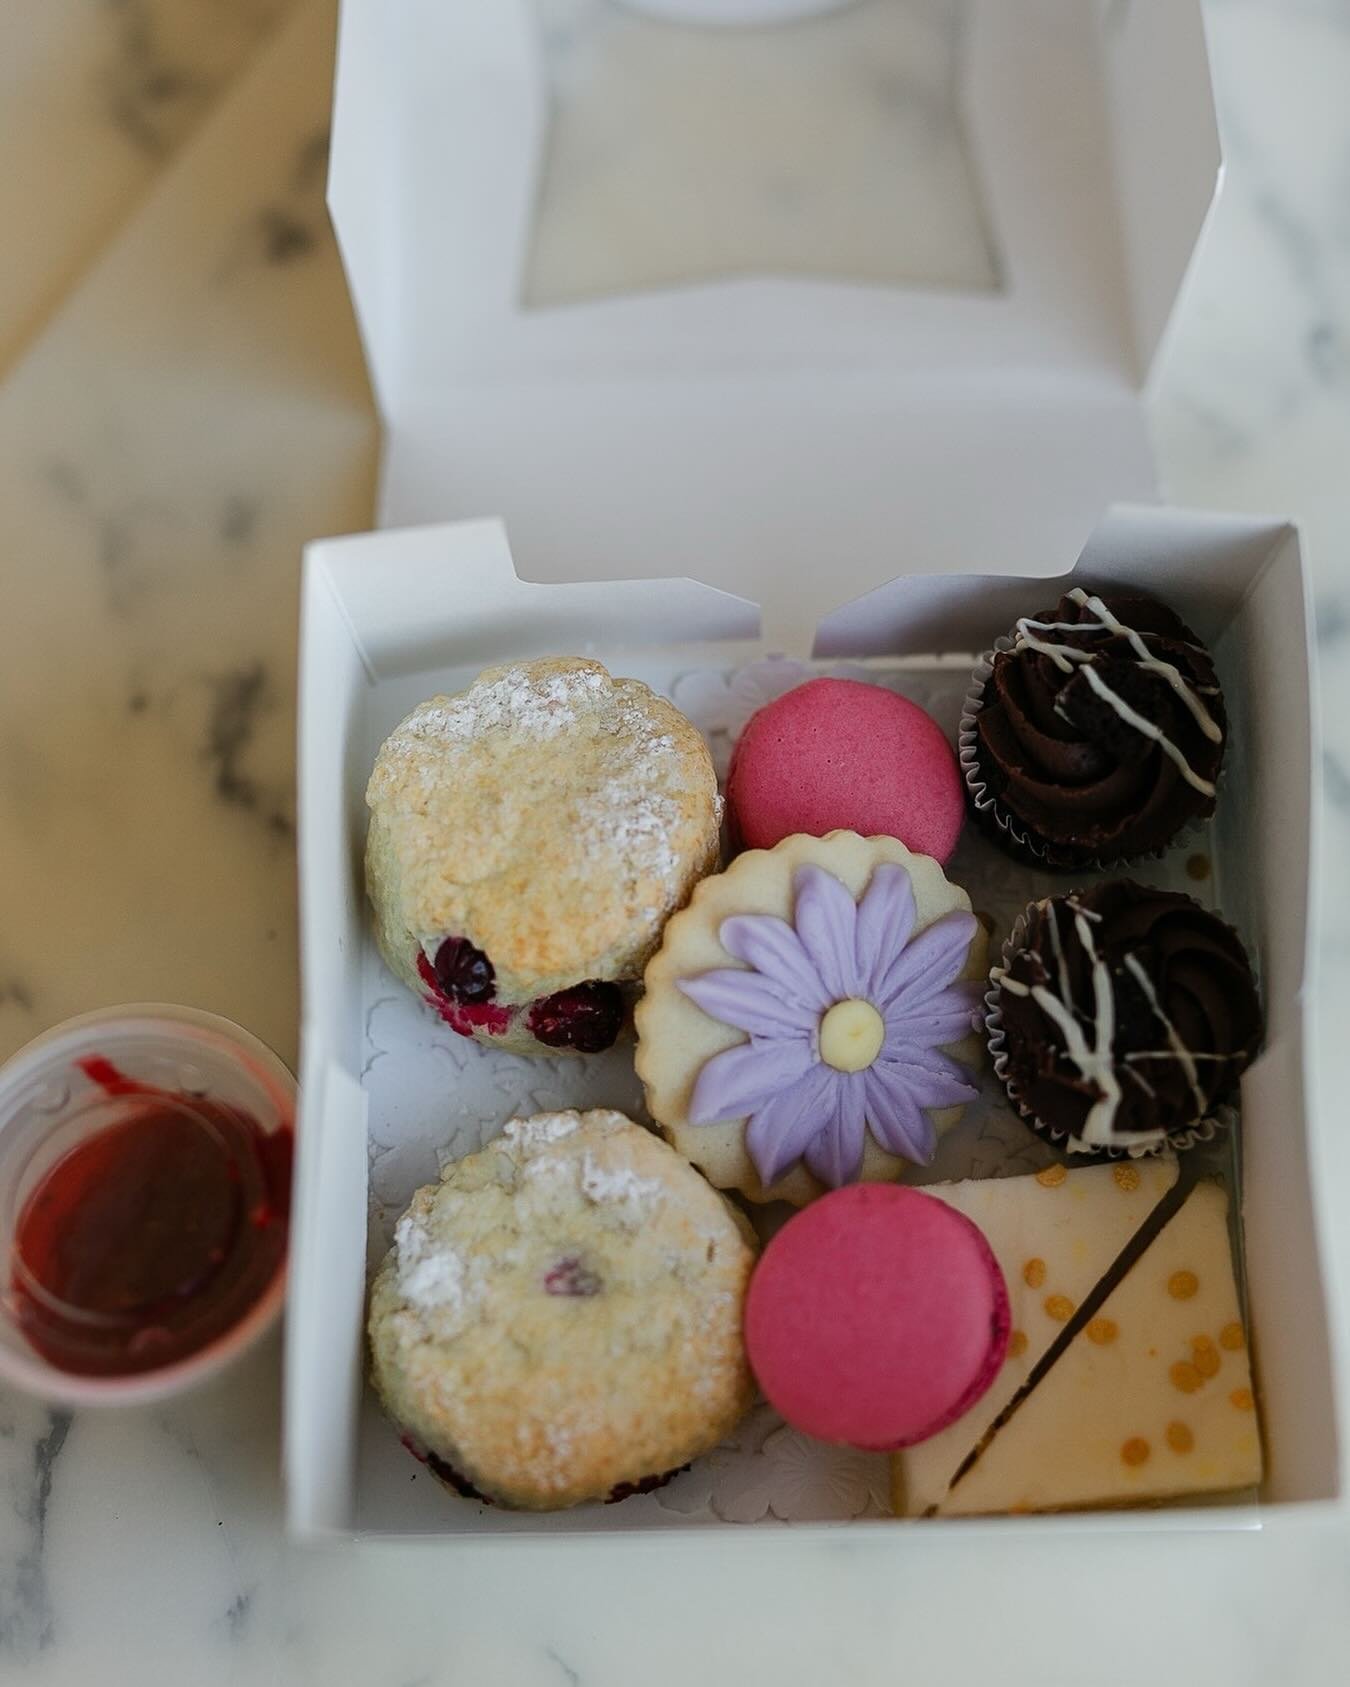 They say good things come in small packages...and they&rsquo;re right!
⠀⠀⠀⠀⠀⠀⠀⠀⠀
Our Mother&rsquo;s Day Treat Box features An assortment of treats for Mom: mini cranberry scones, sugar cookie, macarons, babycakes and lemon bar...omnomnom!
⠀⠀⠀⠀⠀⠀⠀⠀⠀
M